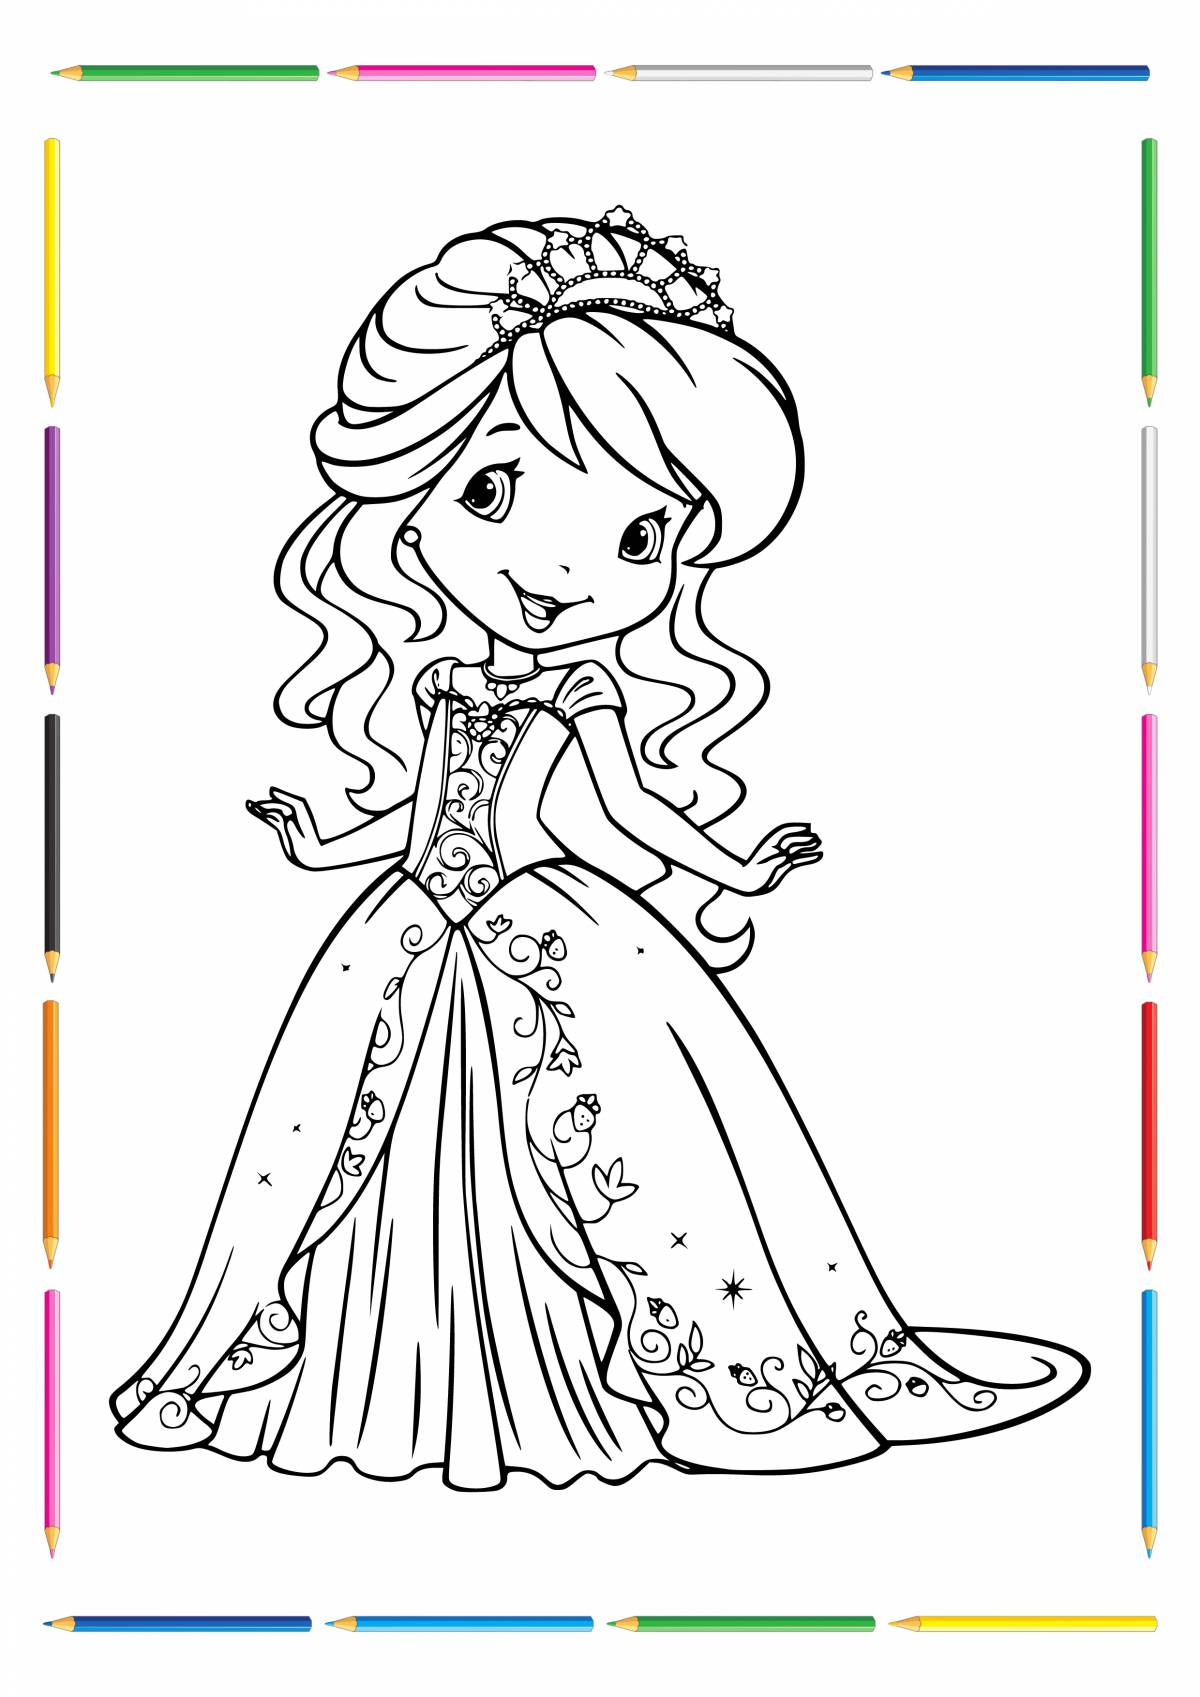 Charming coloring book for 3-4 year old princess girls